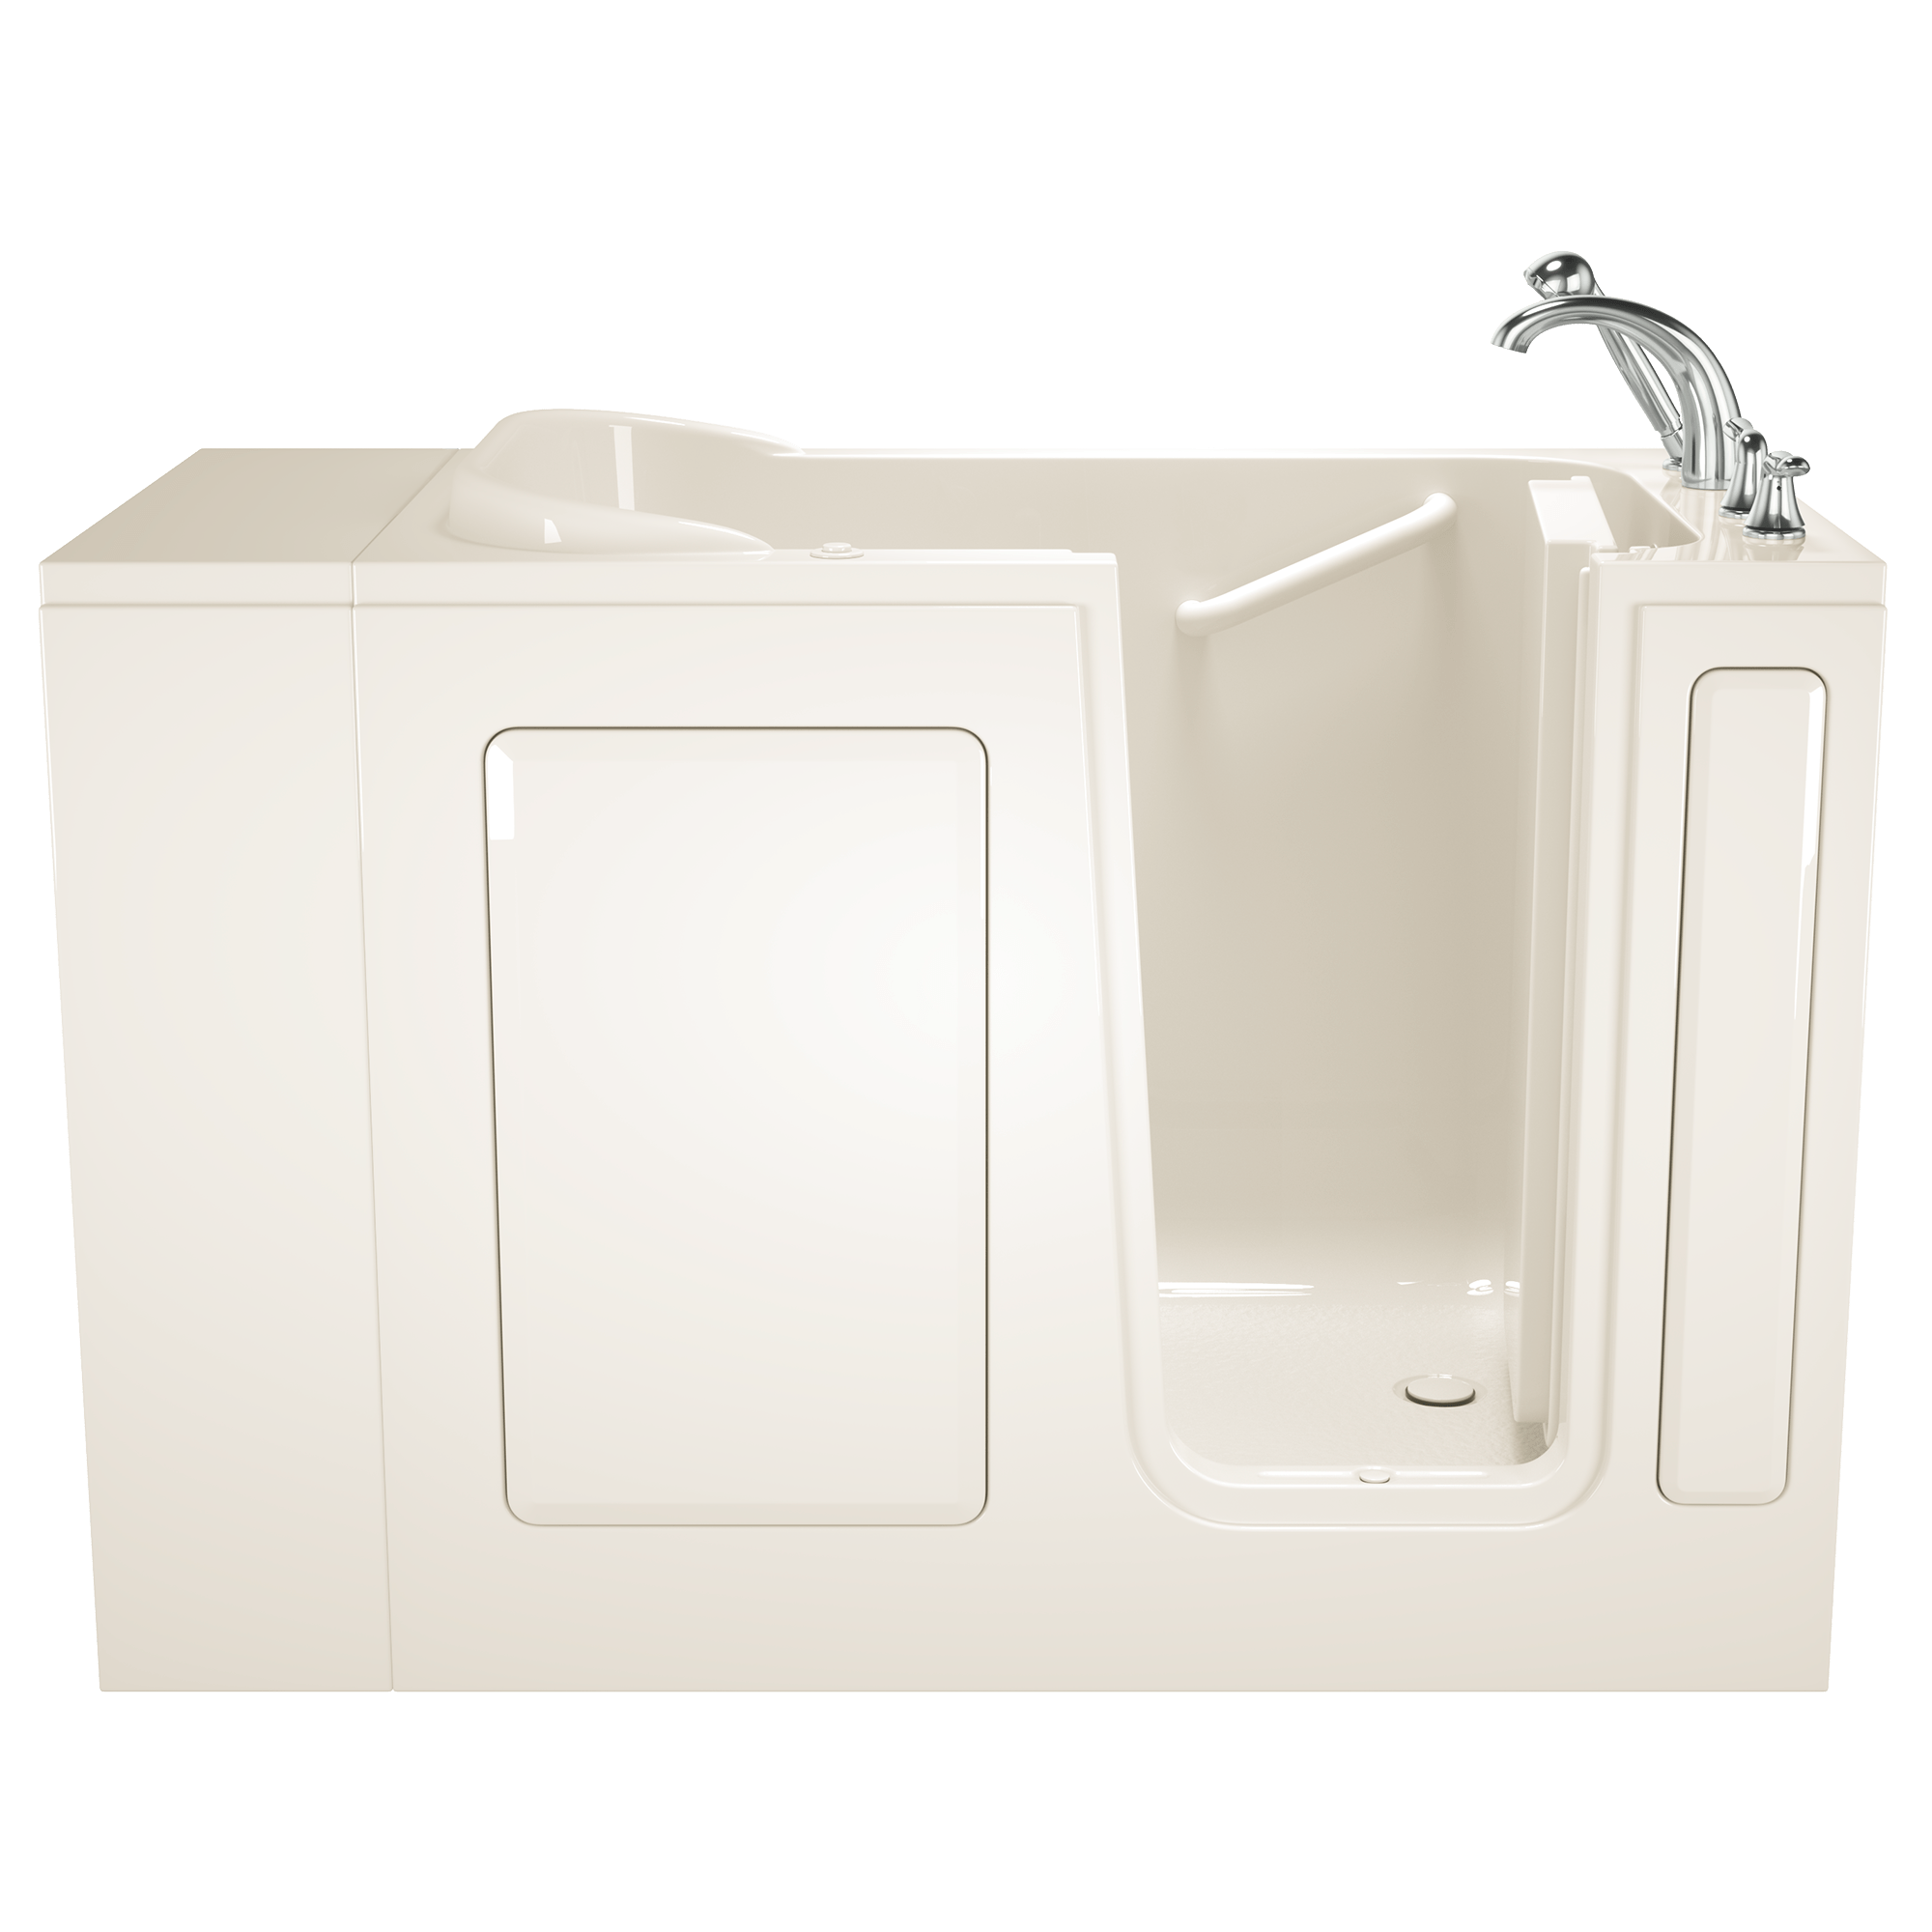 Gelcoat Entry Series 48 x 28-Inch Walk-In Tub With Whirlpool System – Right-Hand Drain With Faucet